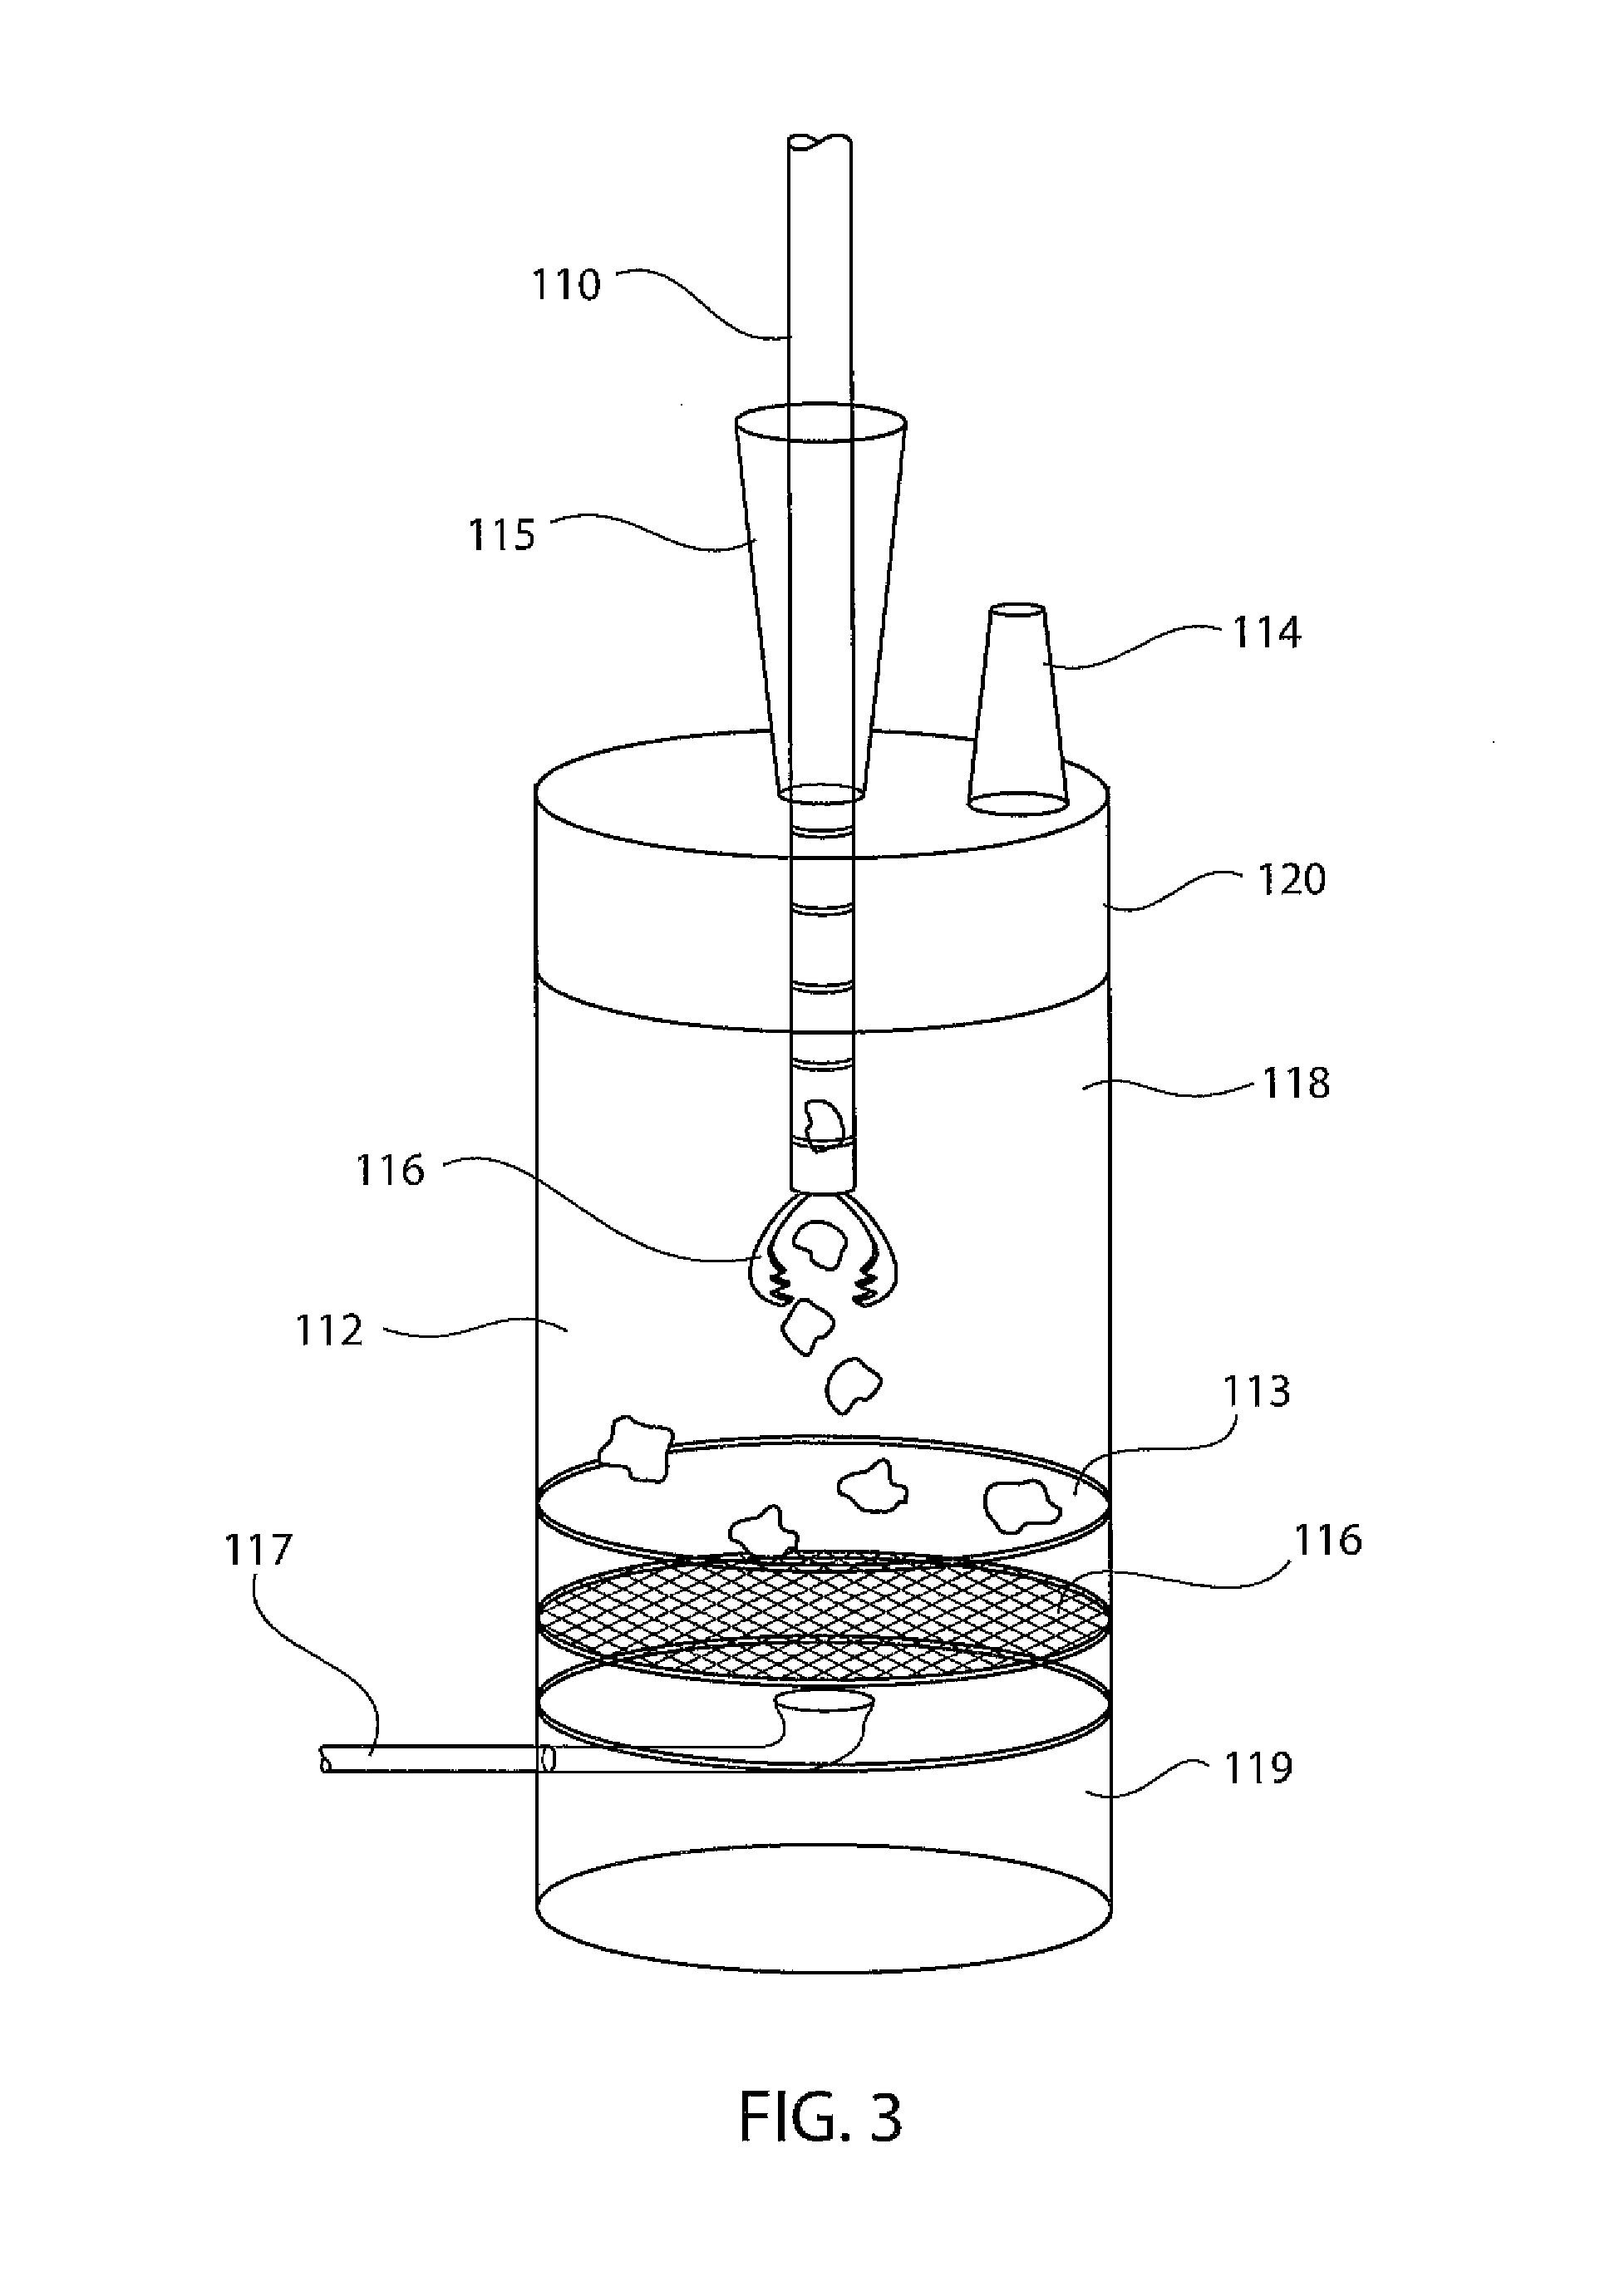 Apparatus and methods for removing and collecting biopsy specimens from biopsy devices with fixation and preparation for histopathological processing or other analysis